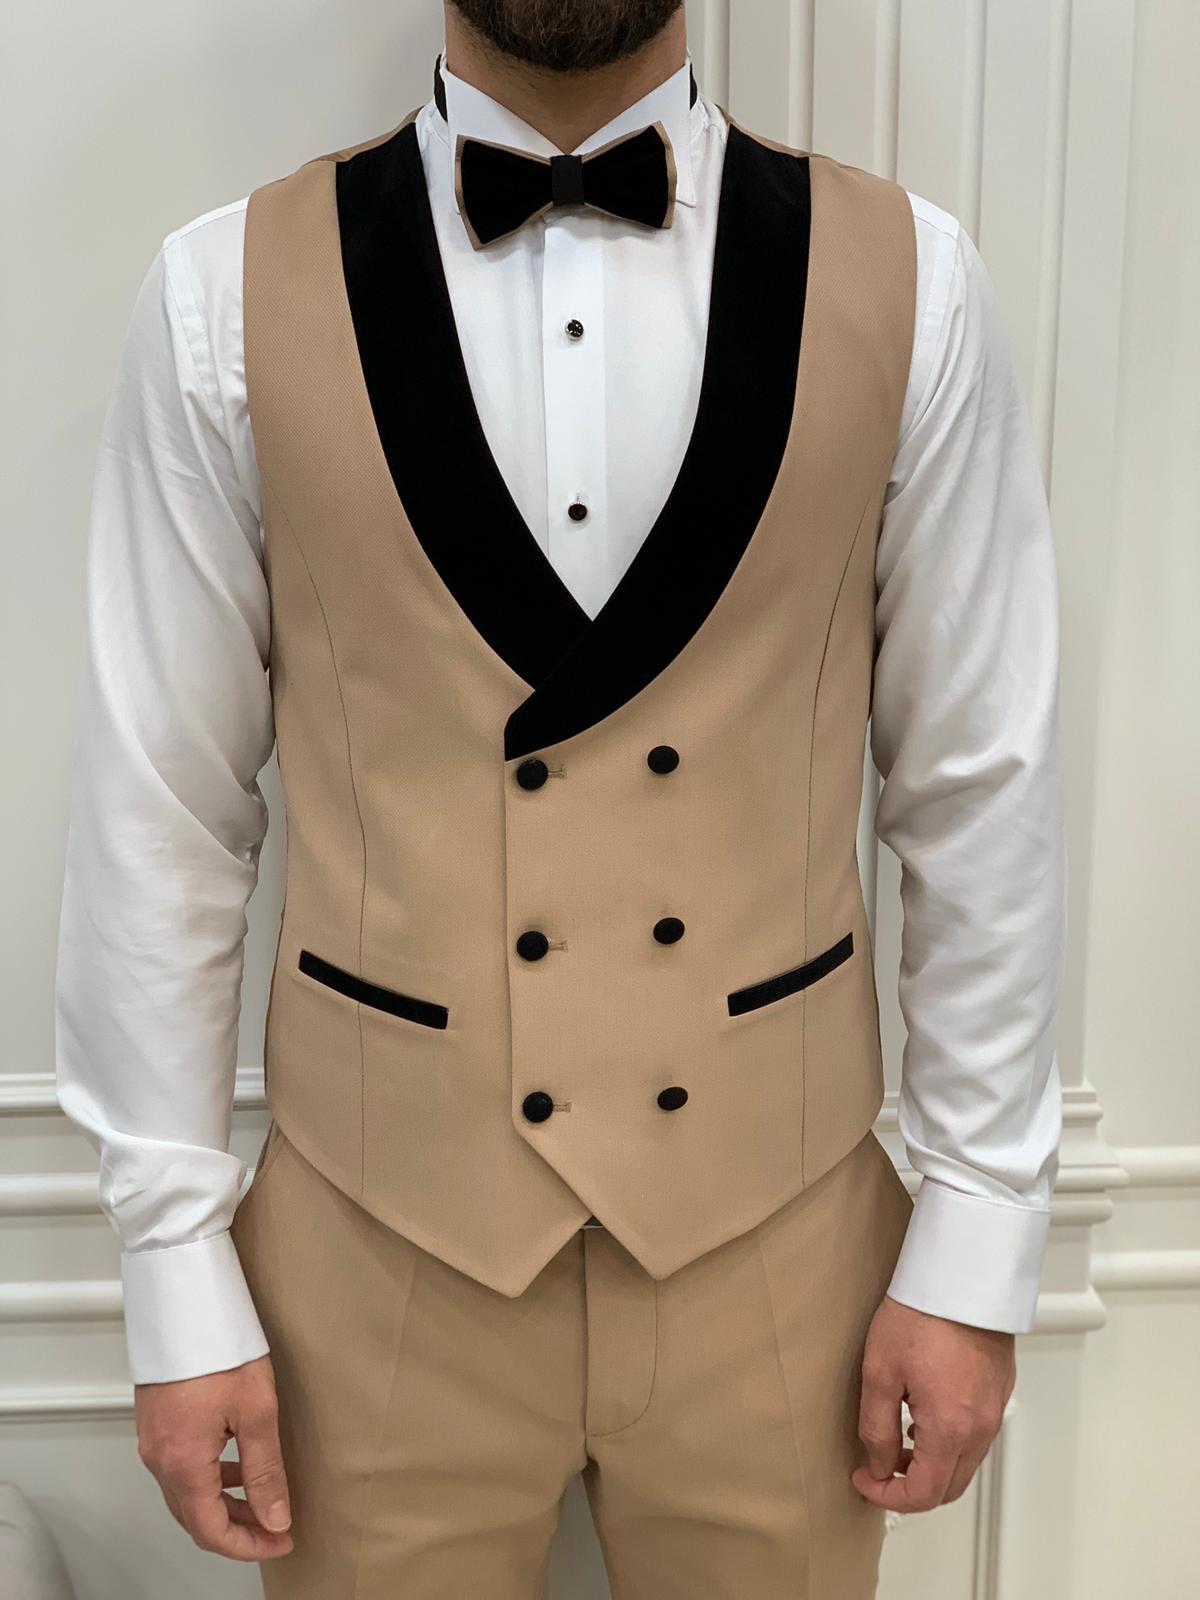 Gold Groom Wedding Tuxedo Suit for Men by GentWith.com with Free Worldwide Shipping